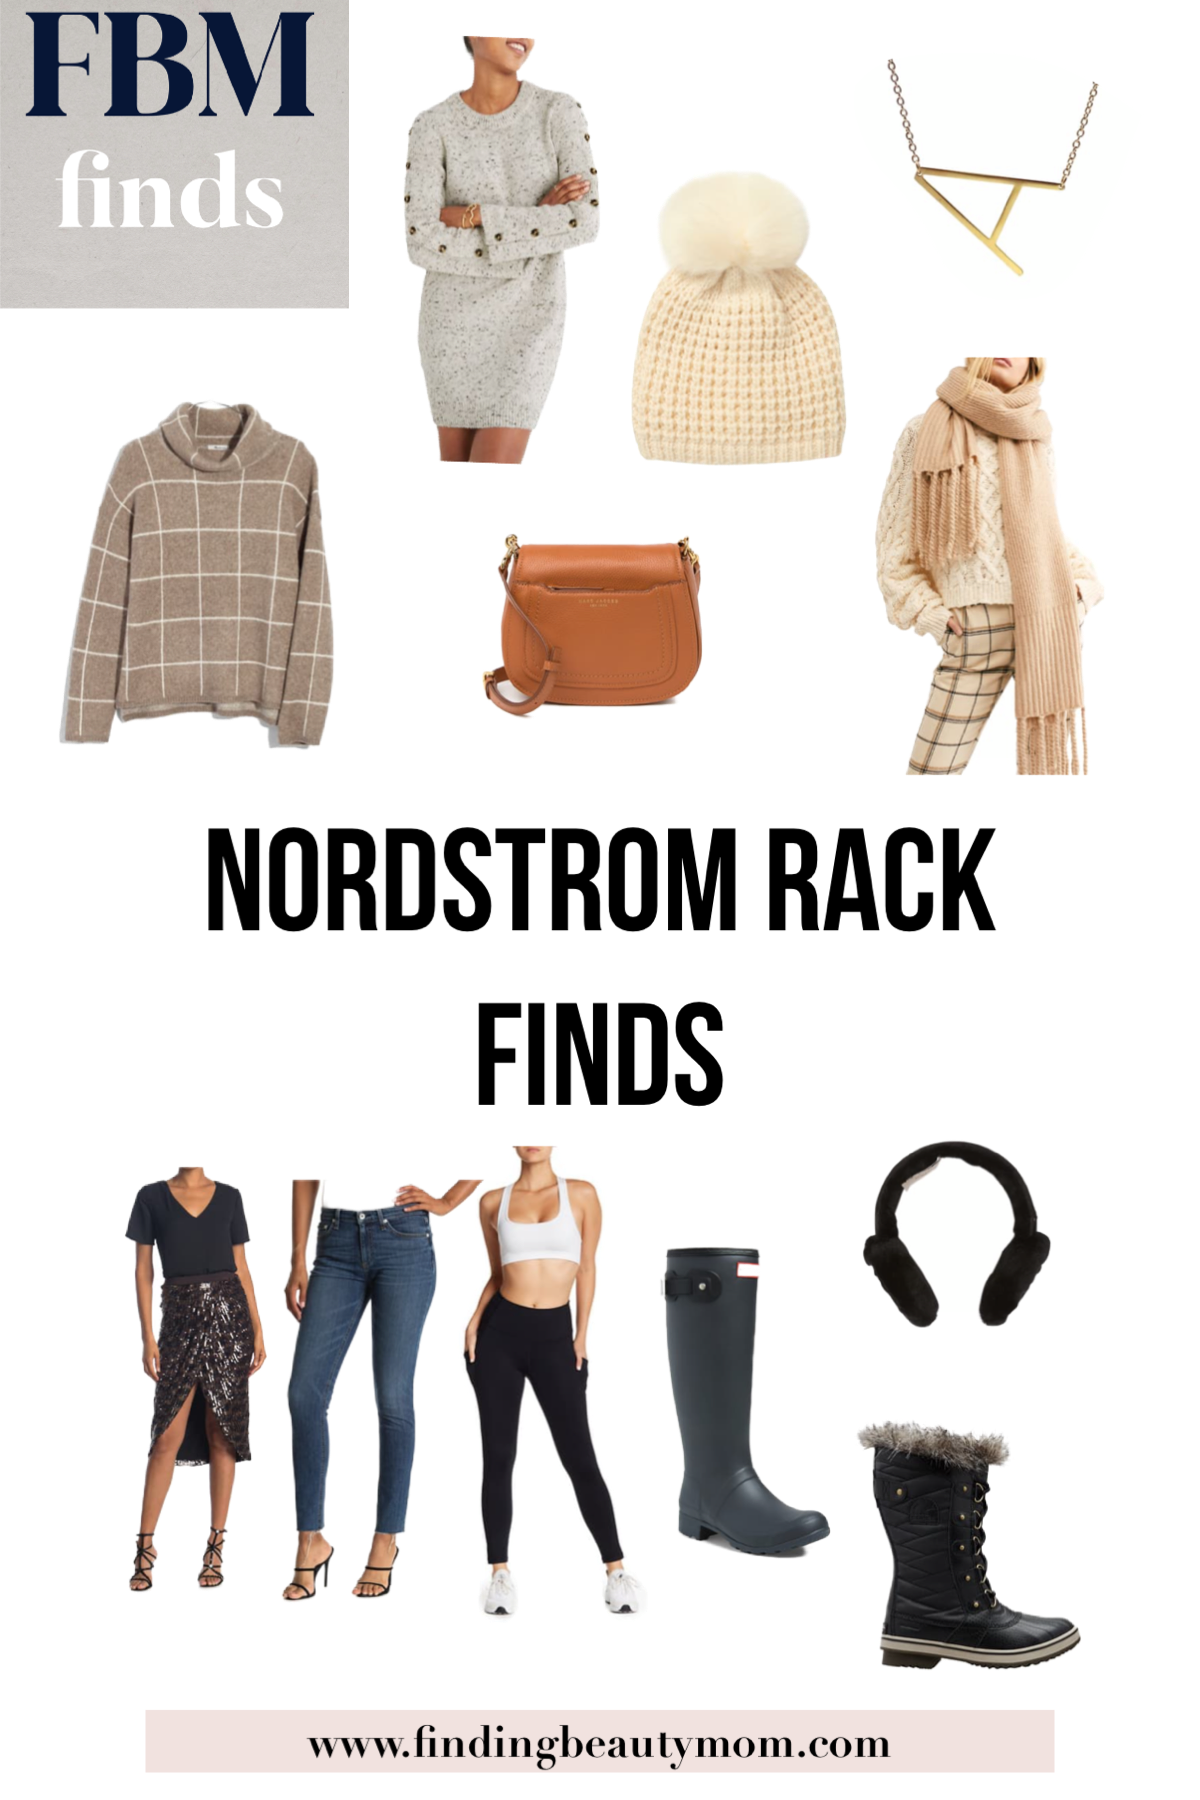 Nordstrom rack holiday gifts, gifts from Nordstrom rack